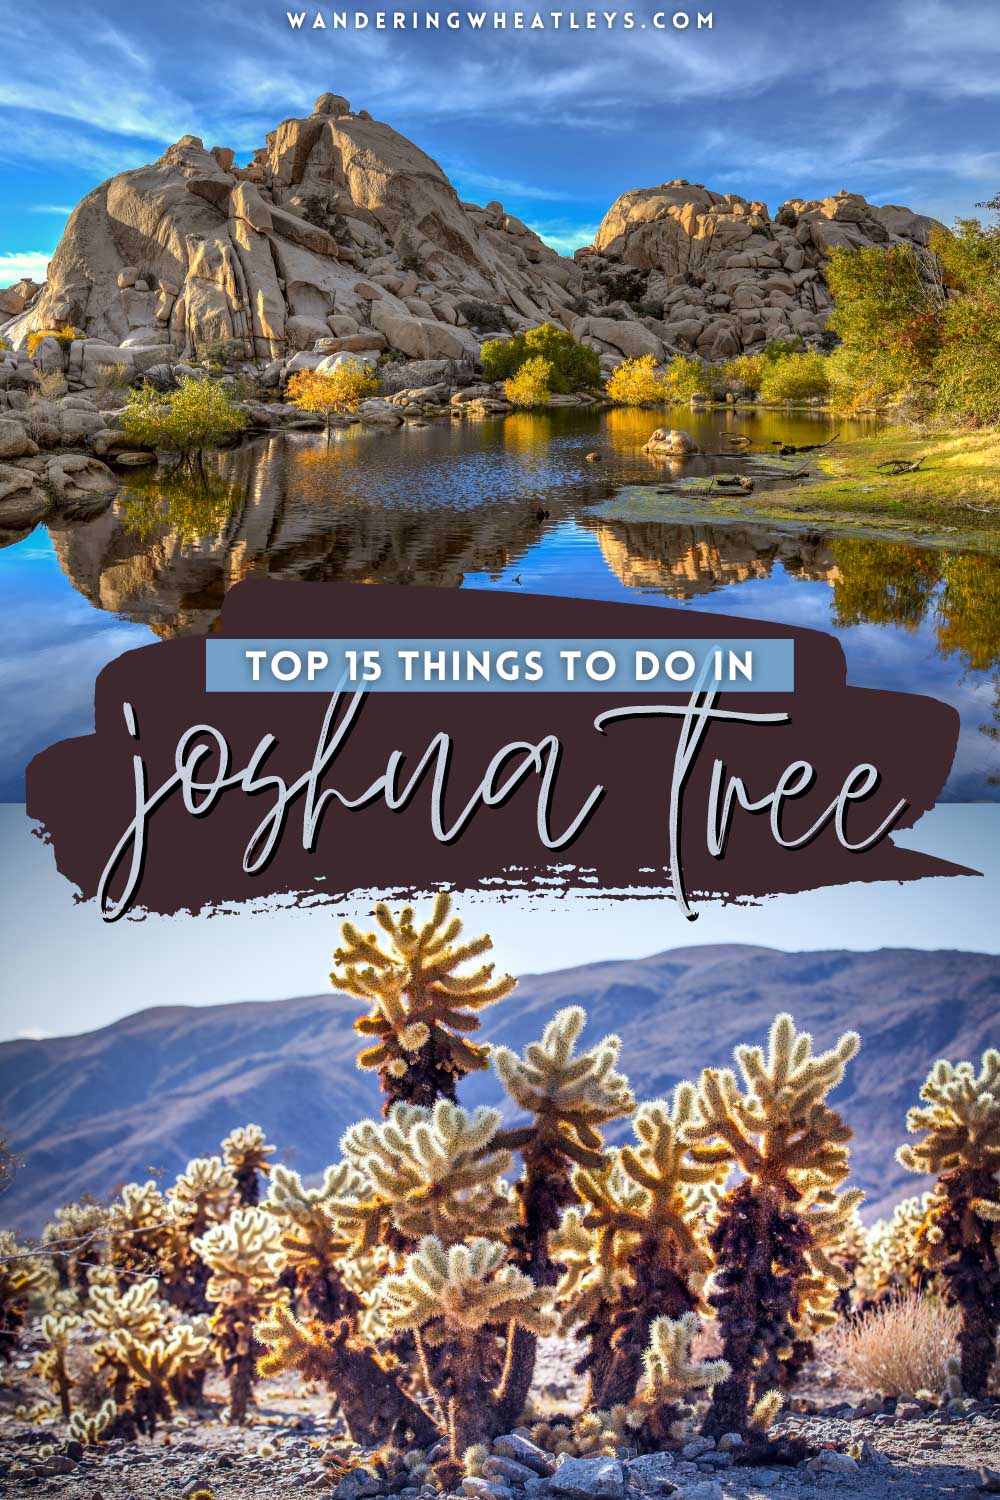 The Best Things to do in Joshua Tree National Park